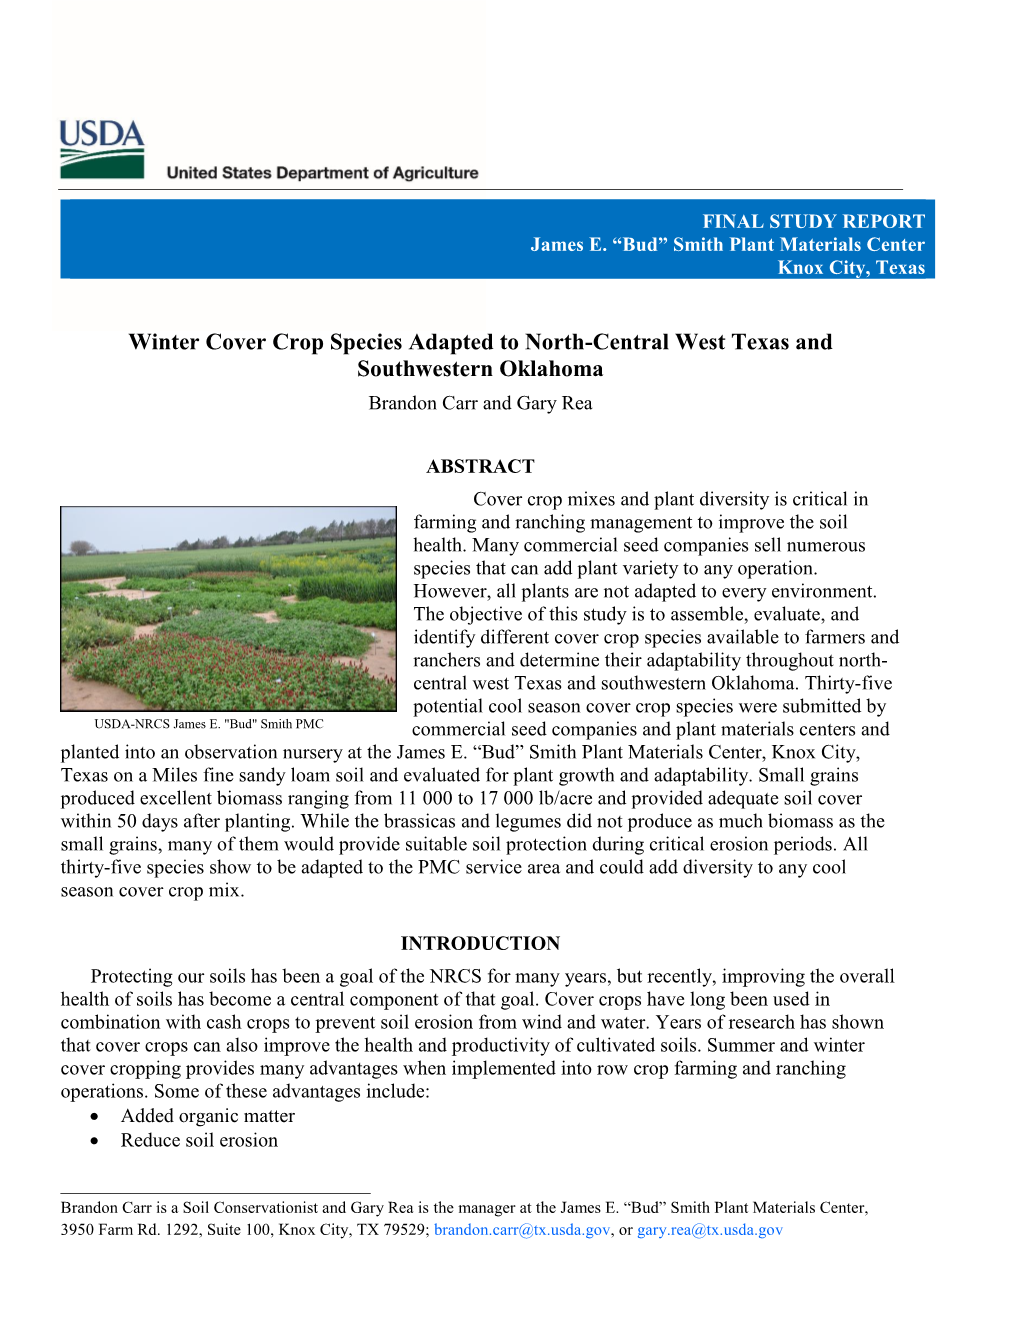 Winter Cover Crop Species Adapted to North-Central West Texas and Southwestern Oklahoma Brandon Carr and Gary Rea